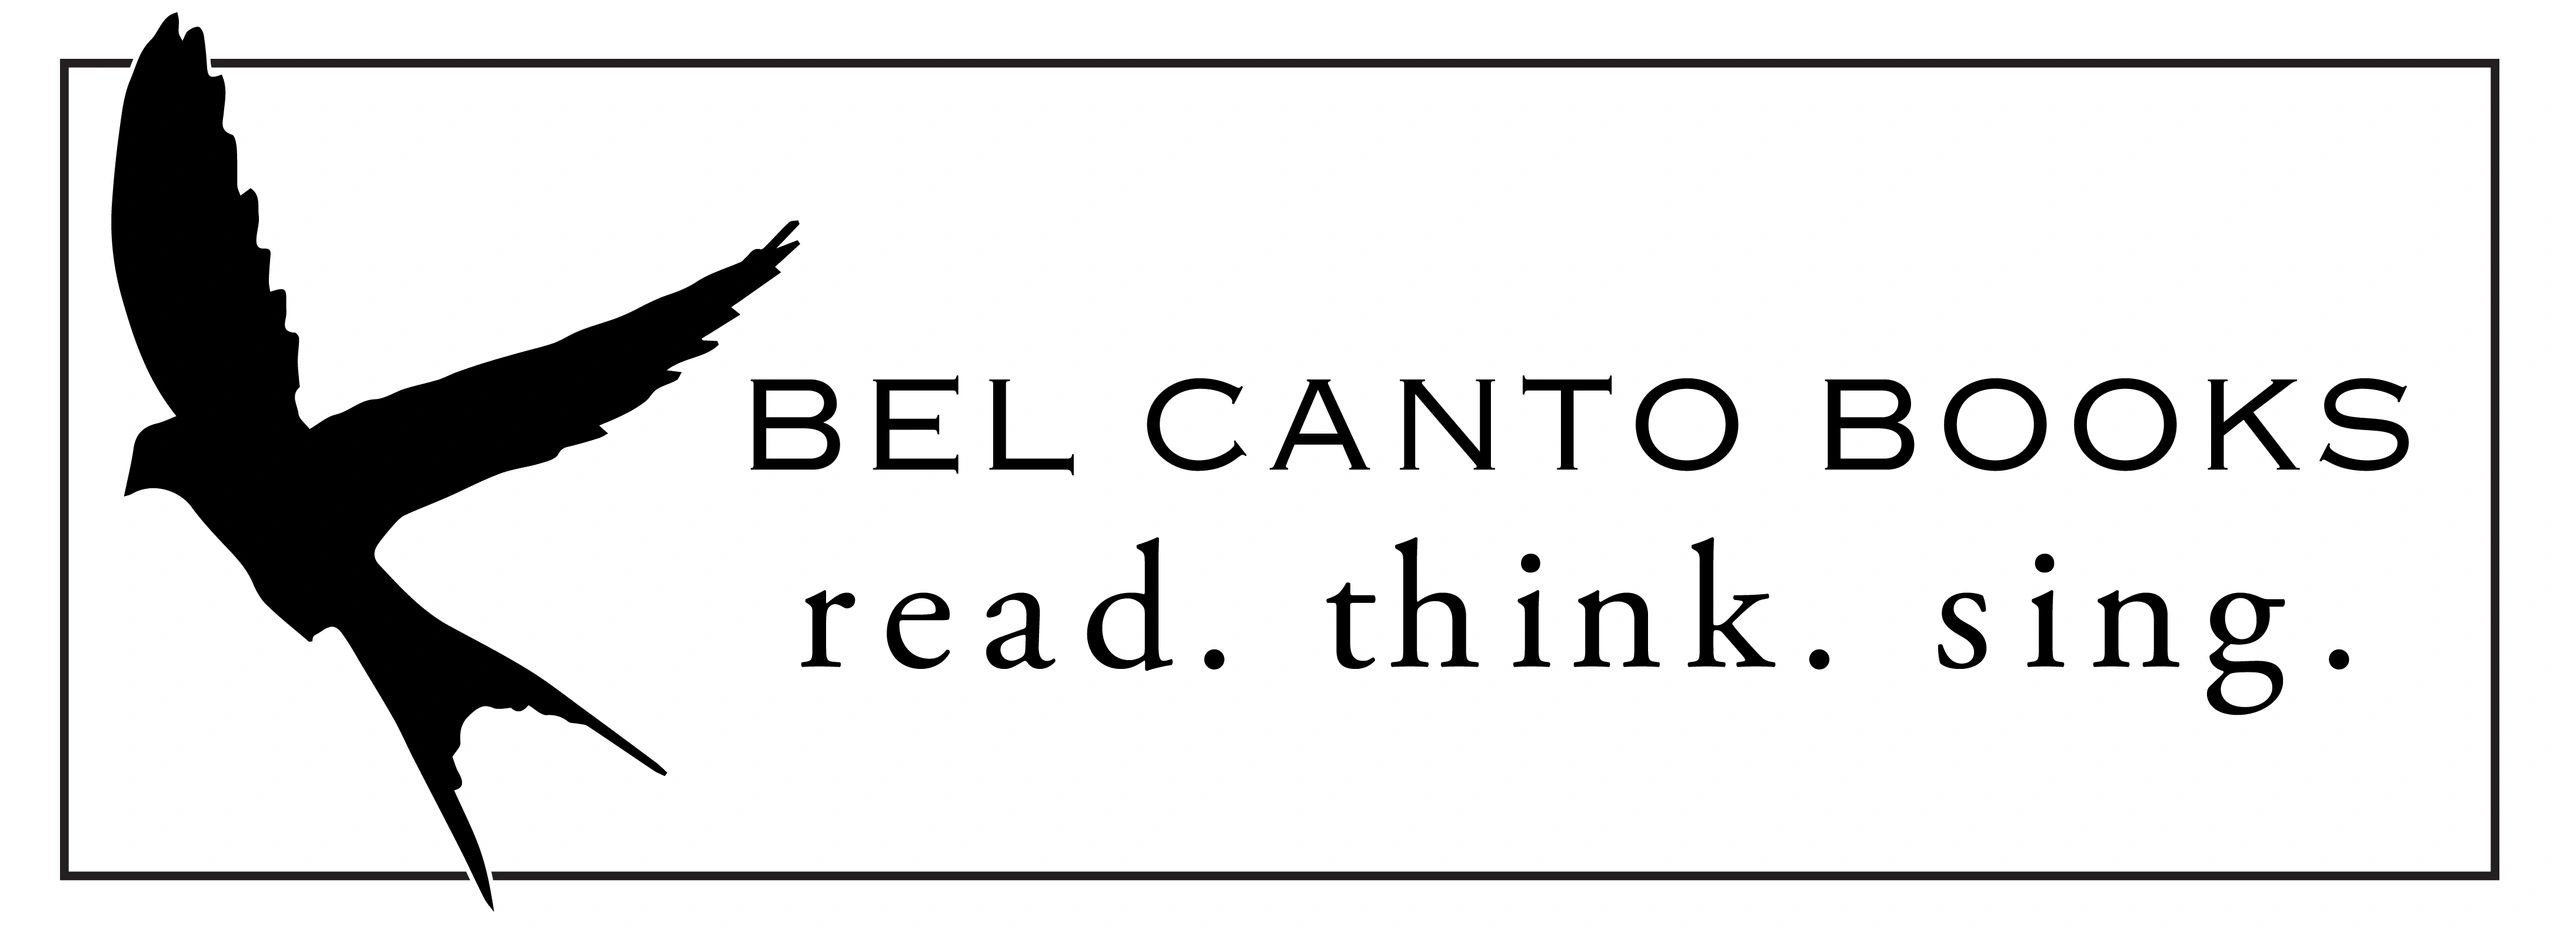 bel canto goodreads